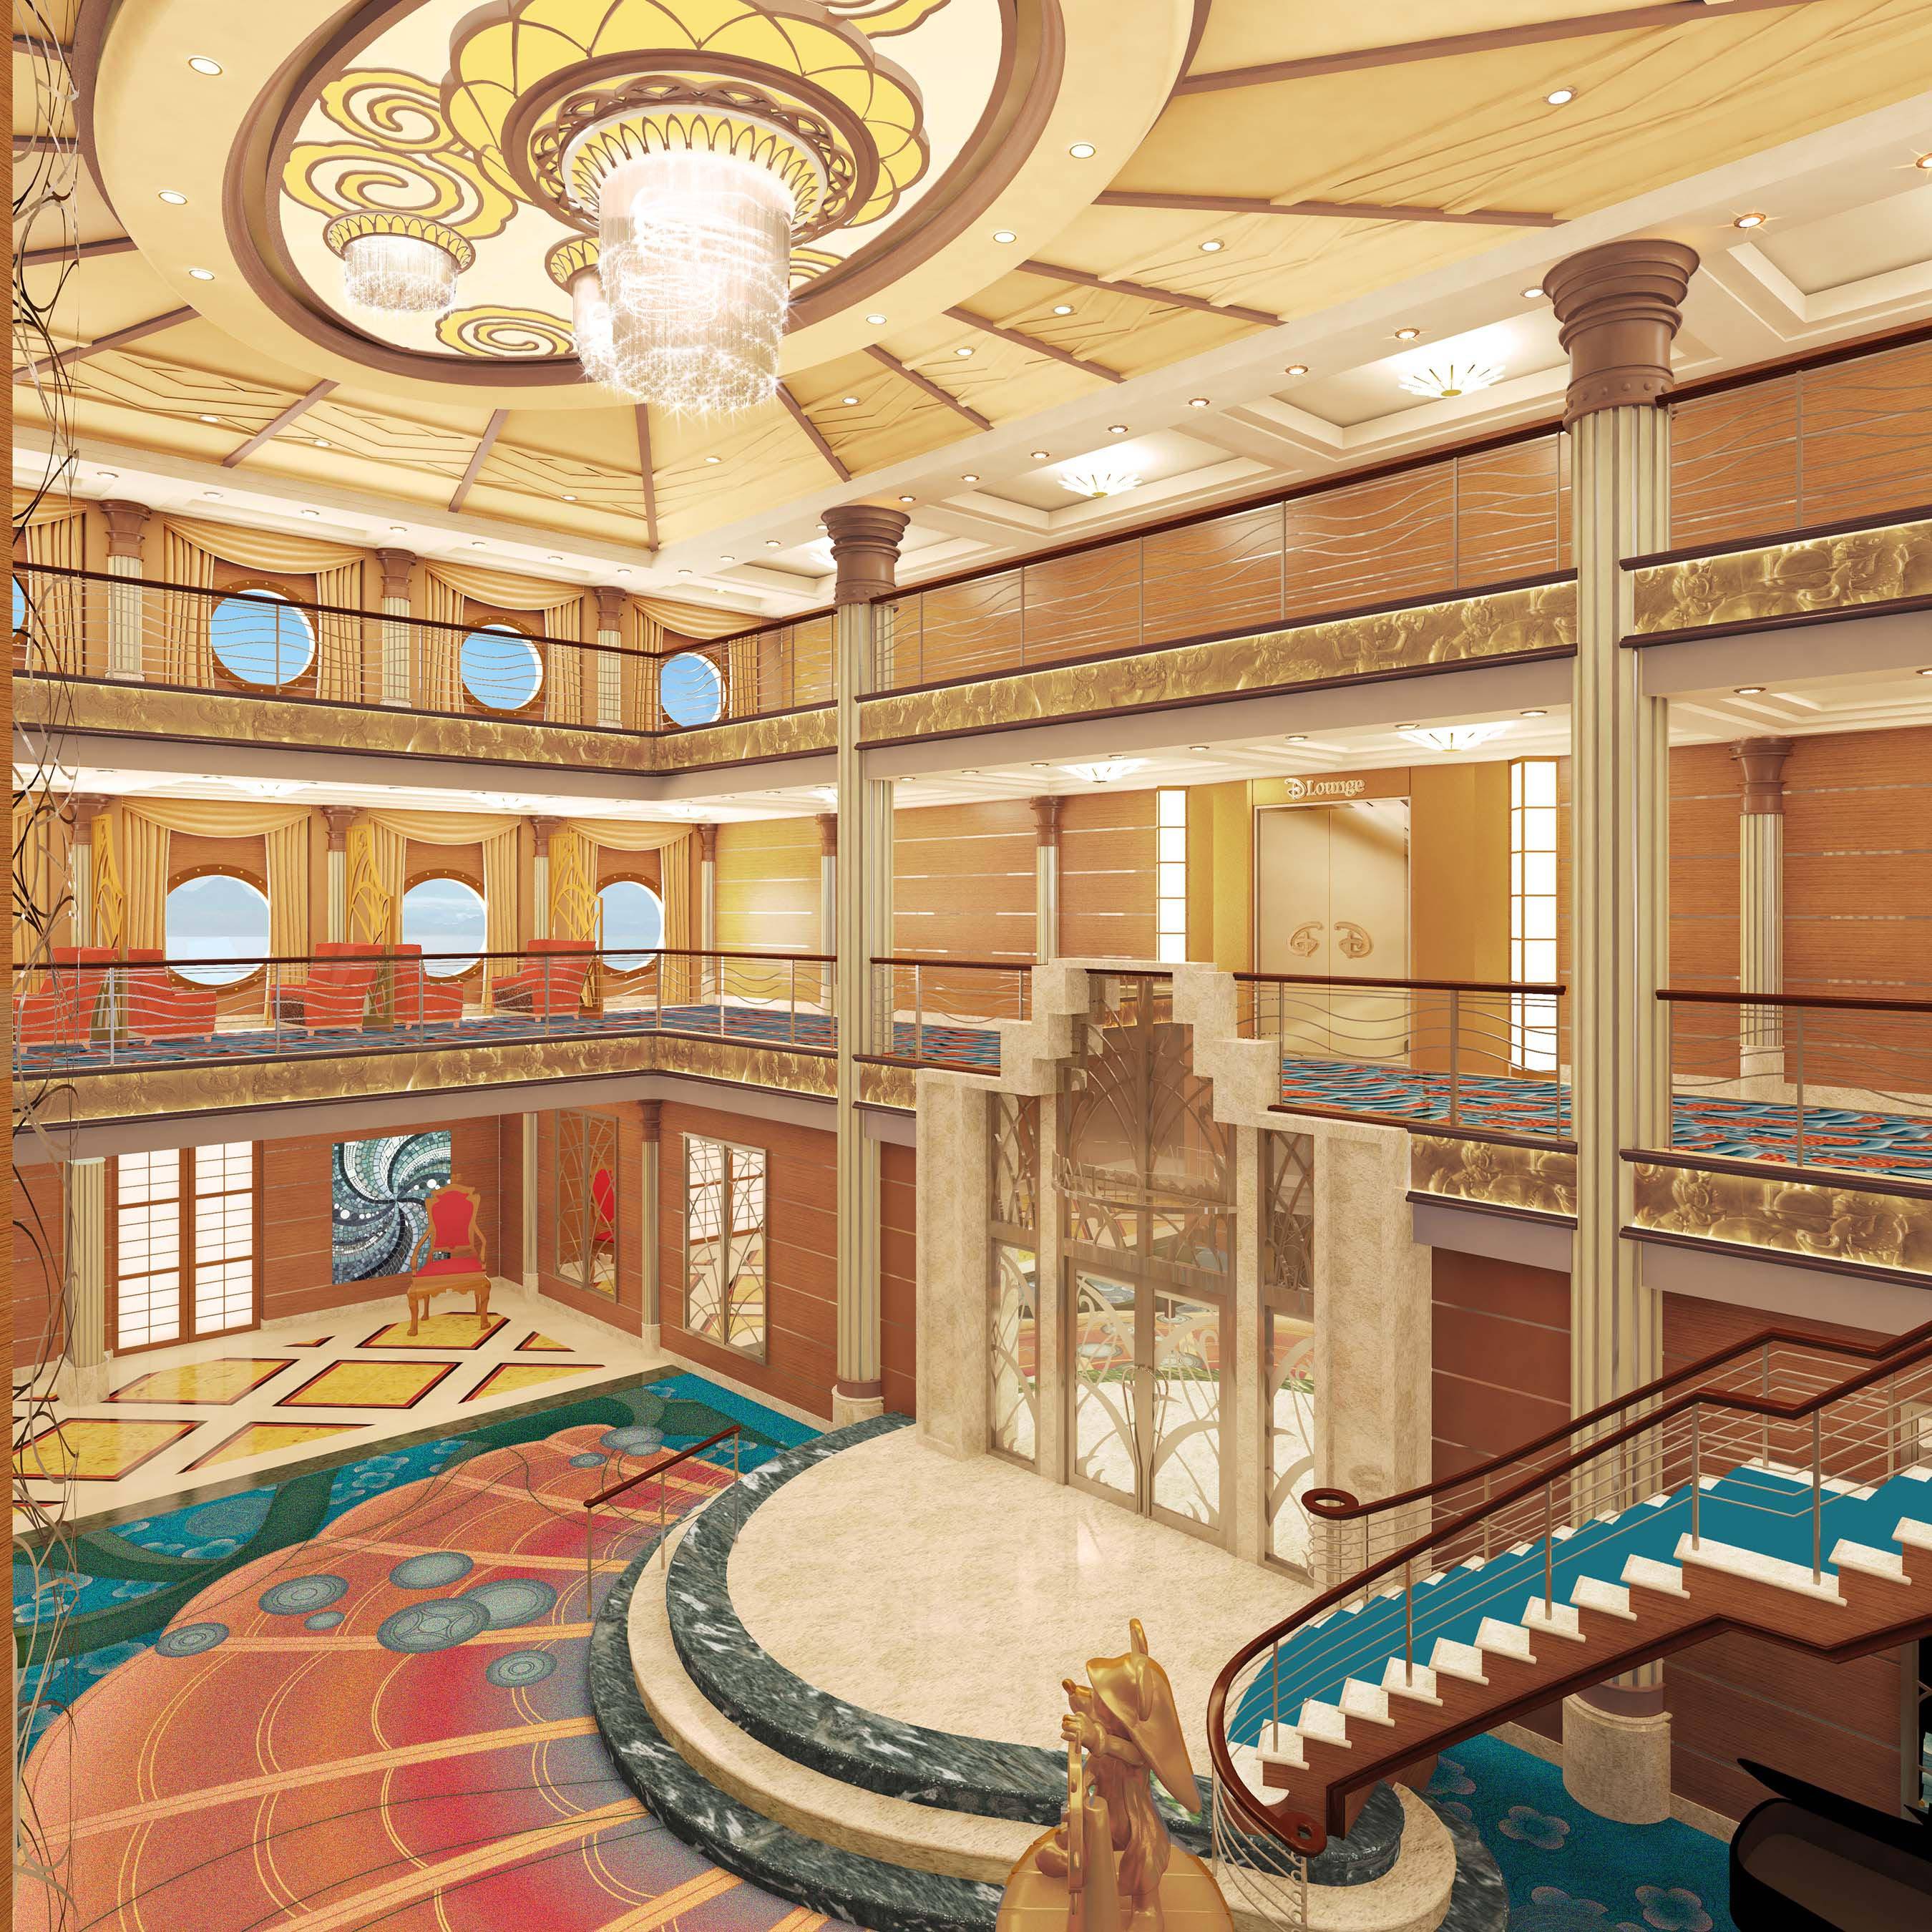 Disney to bring brand new experiences to the Disney Magic Cruise Ship with a major refurbishment